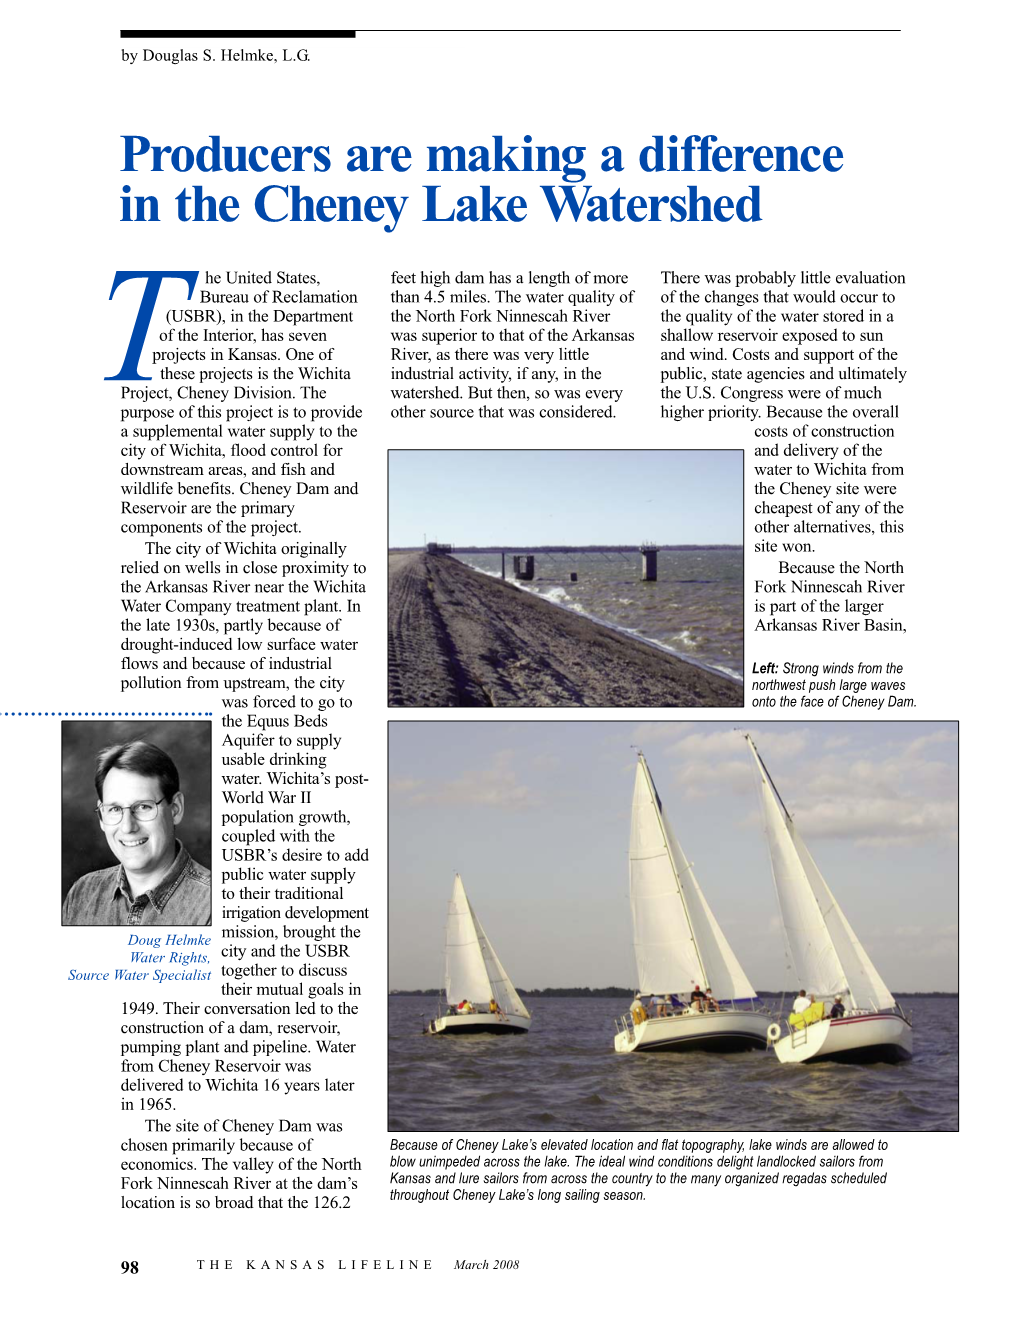 Producers Are Making a Difference in the Cheney Lake Watershed